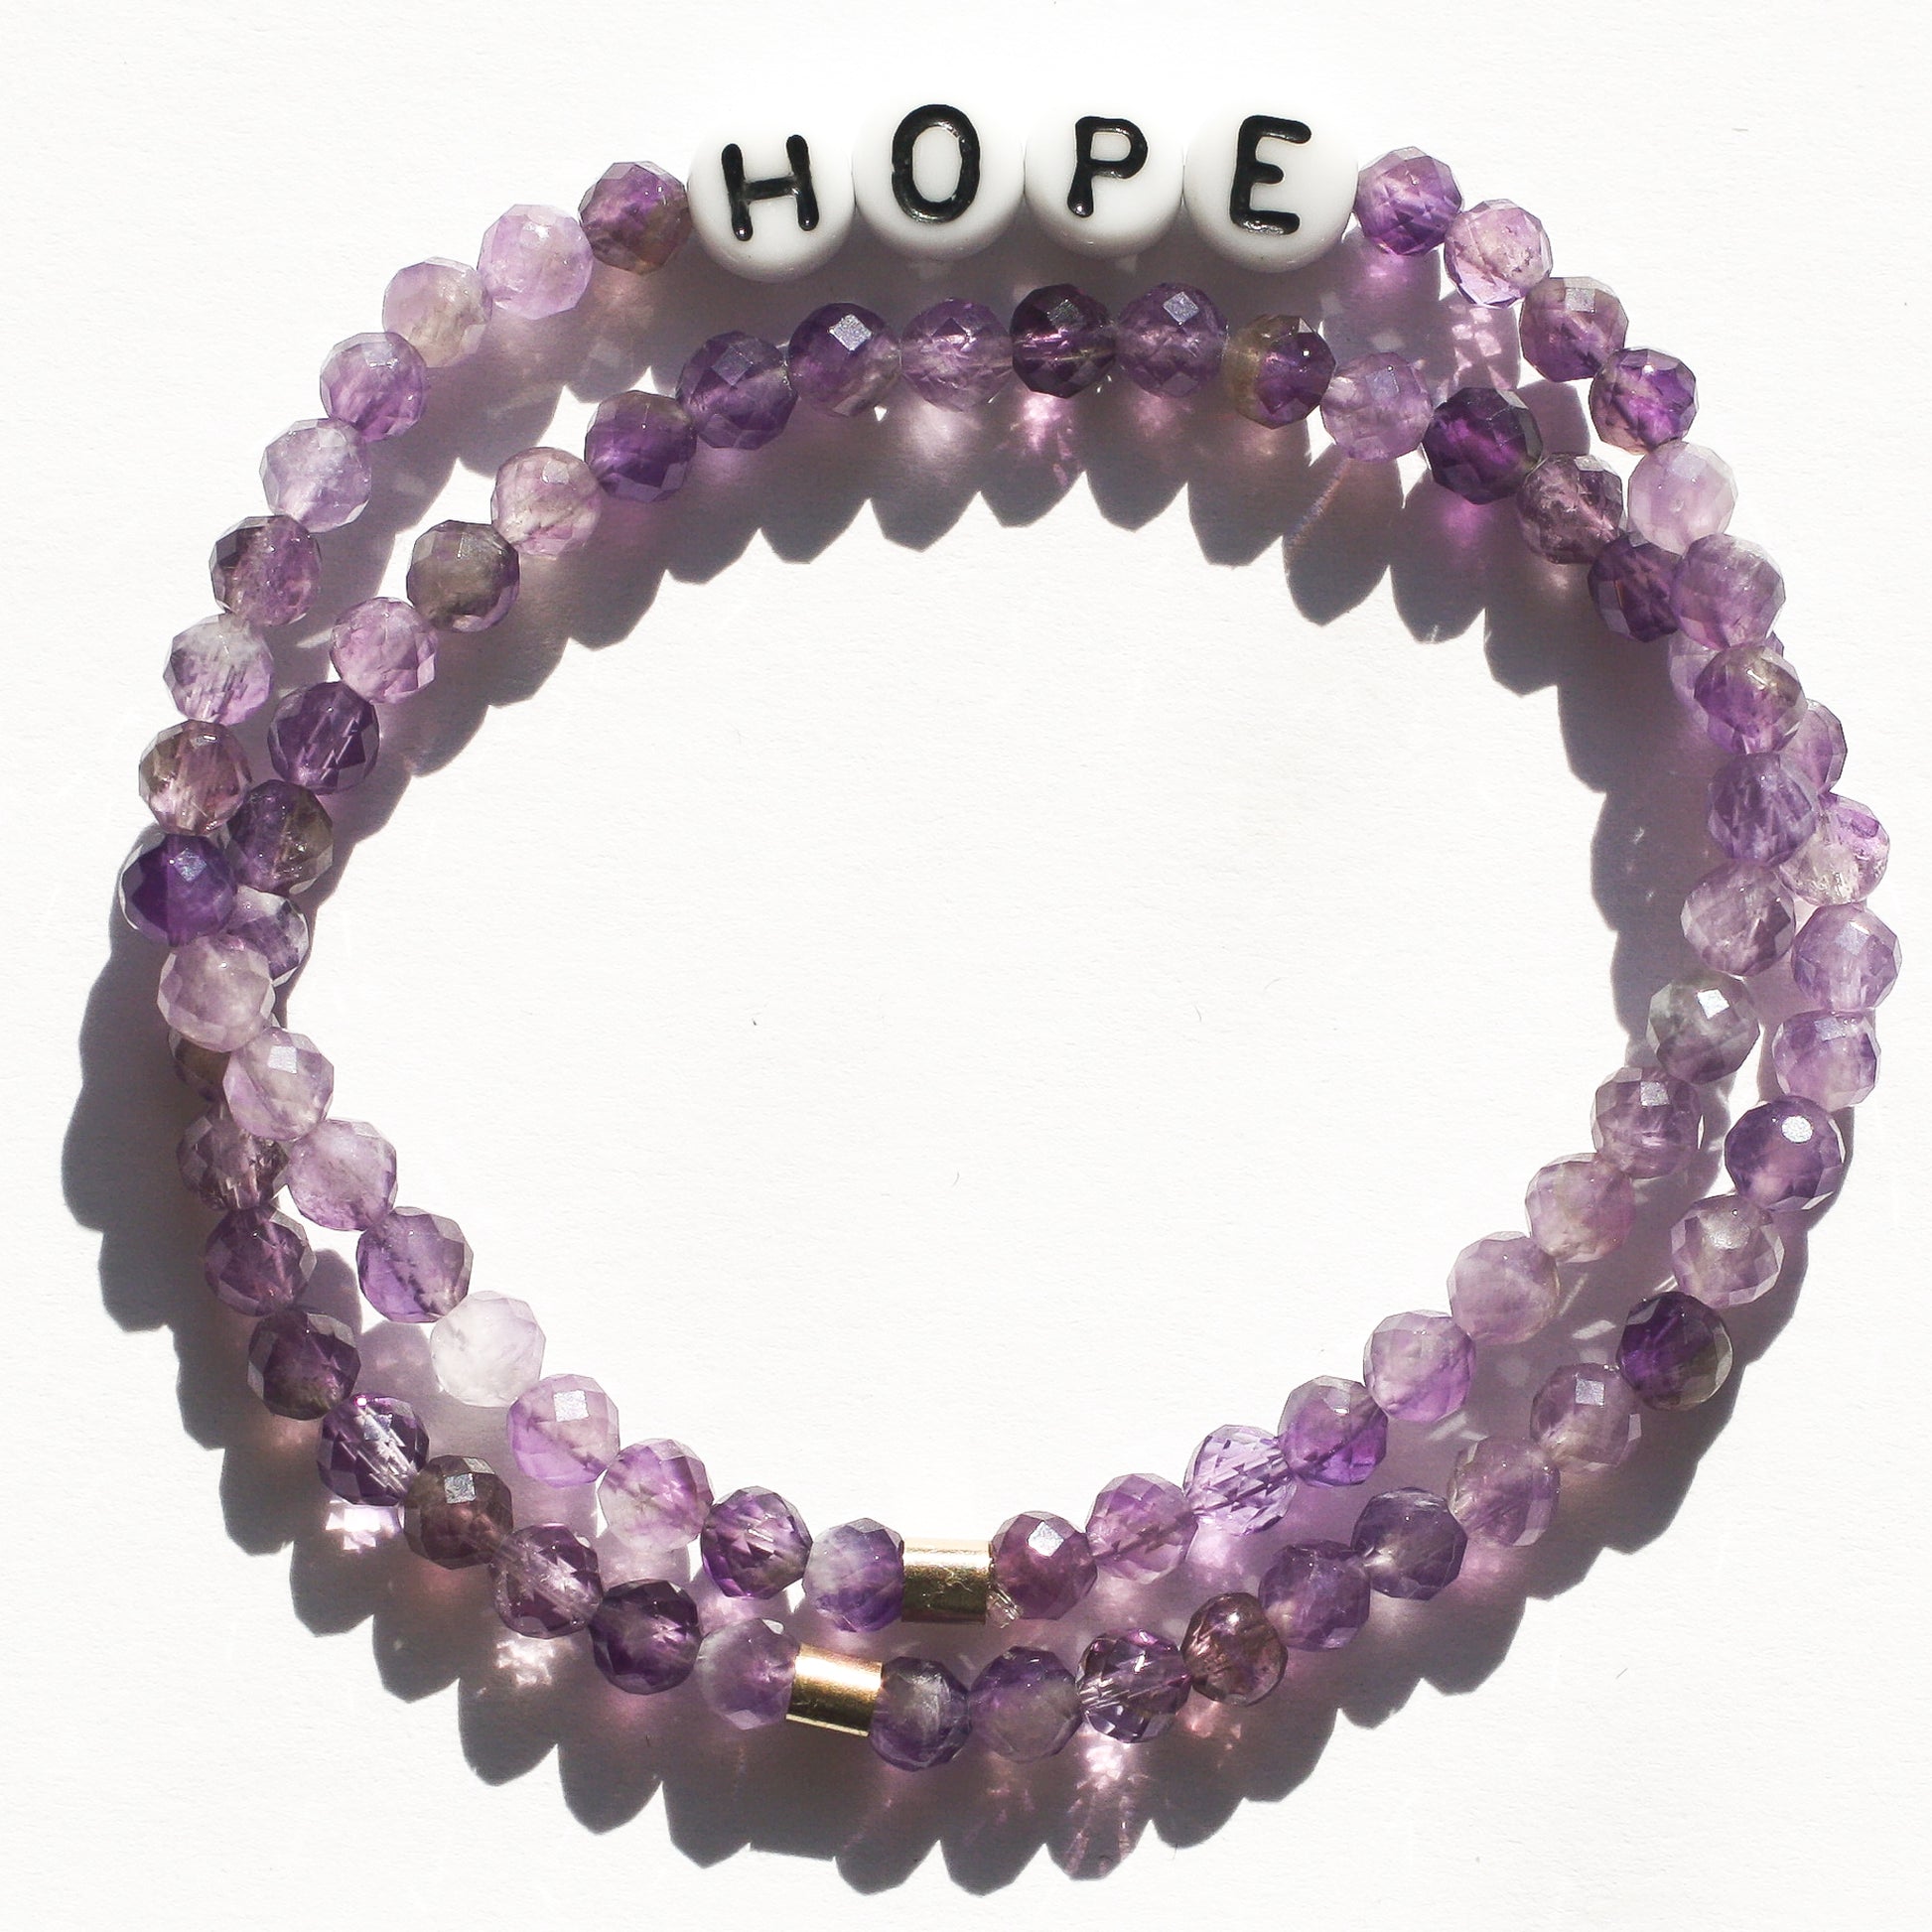 Stack of HOPE and stones-only amethyst bracelets